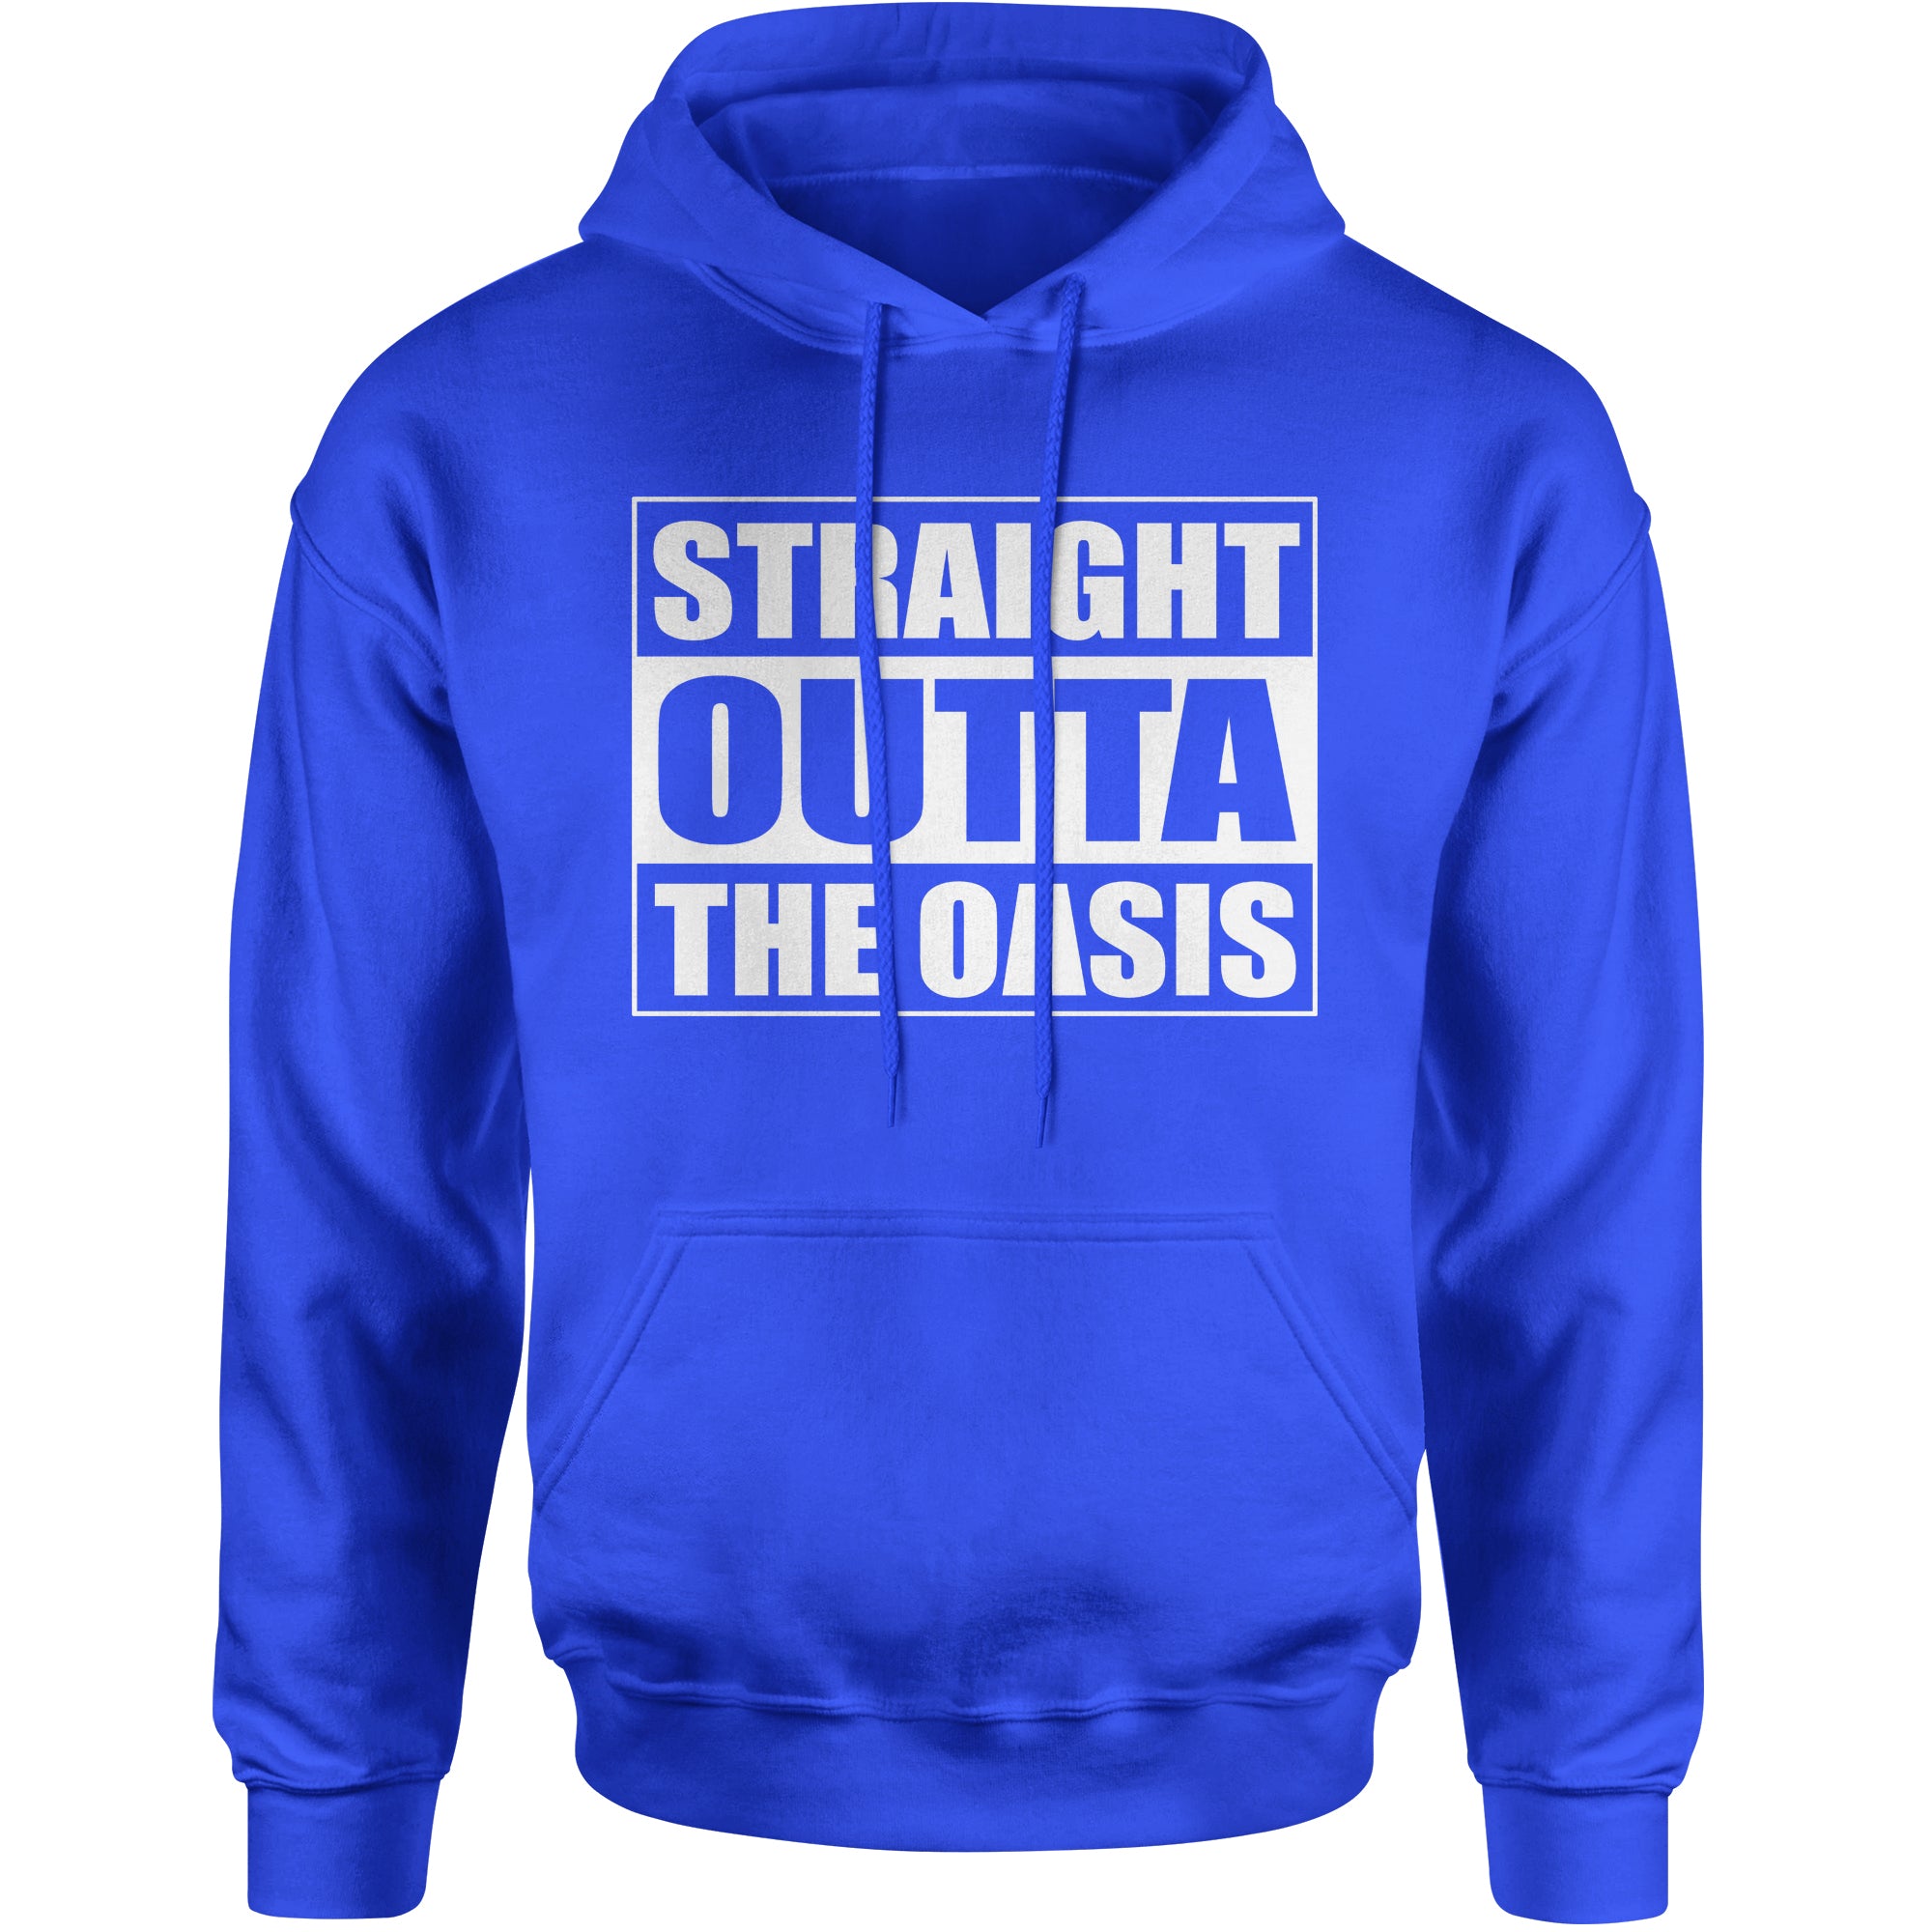 Striaght Outta The Oasis player one ready  Hoodie